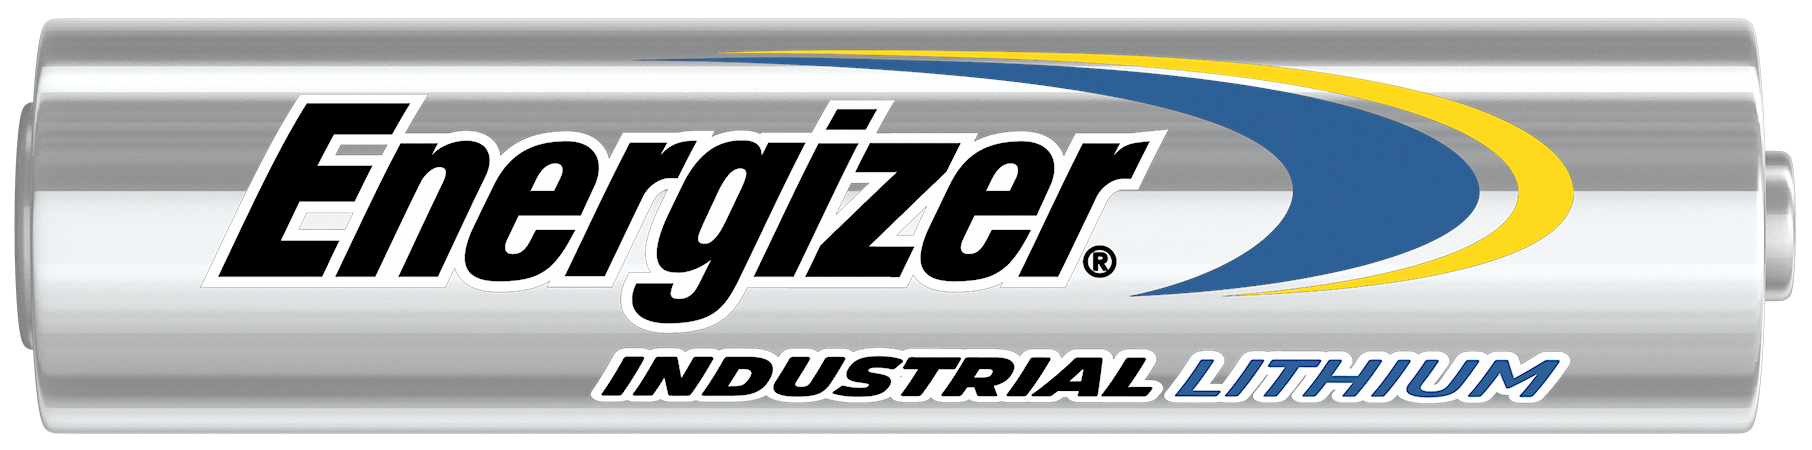 Energizer Industrial Lithium AAA Battery